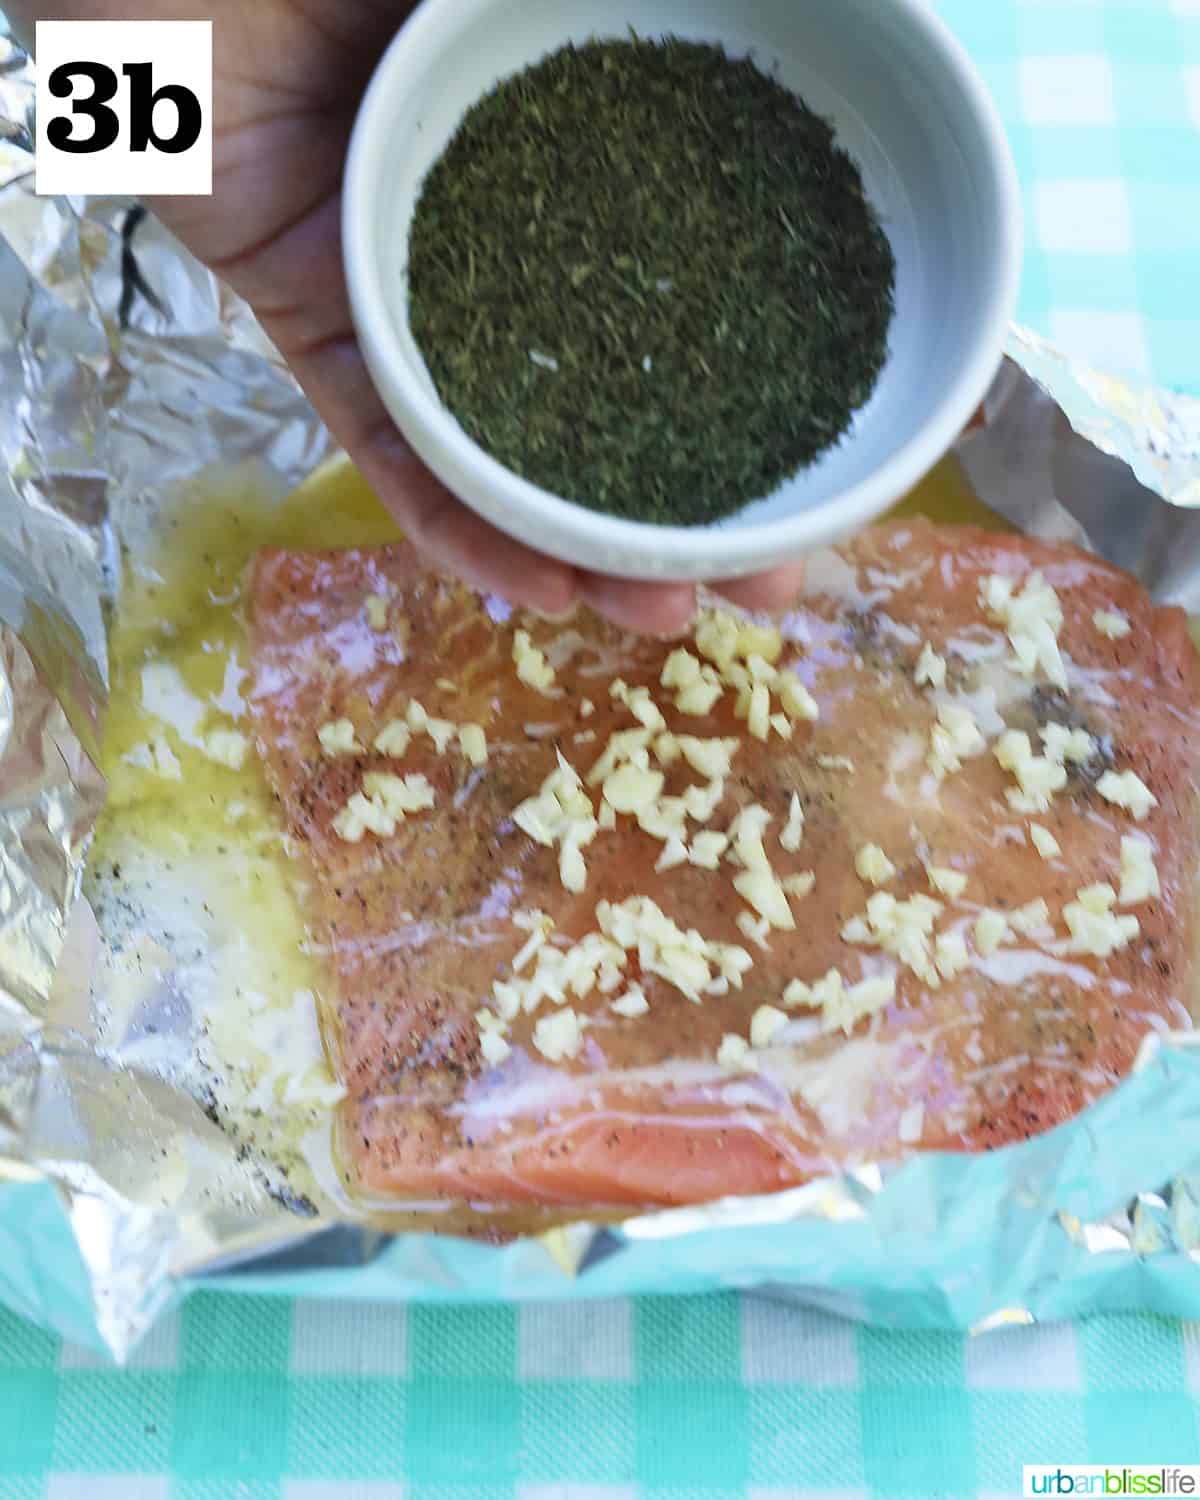 bowl of dill being poured onto salmon and garlic in foil on a checkered tablecloth.